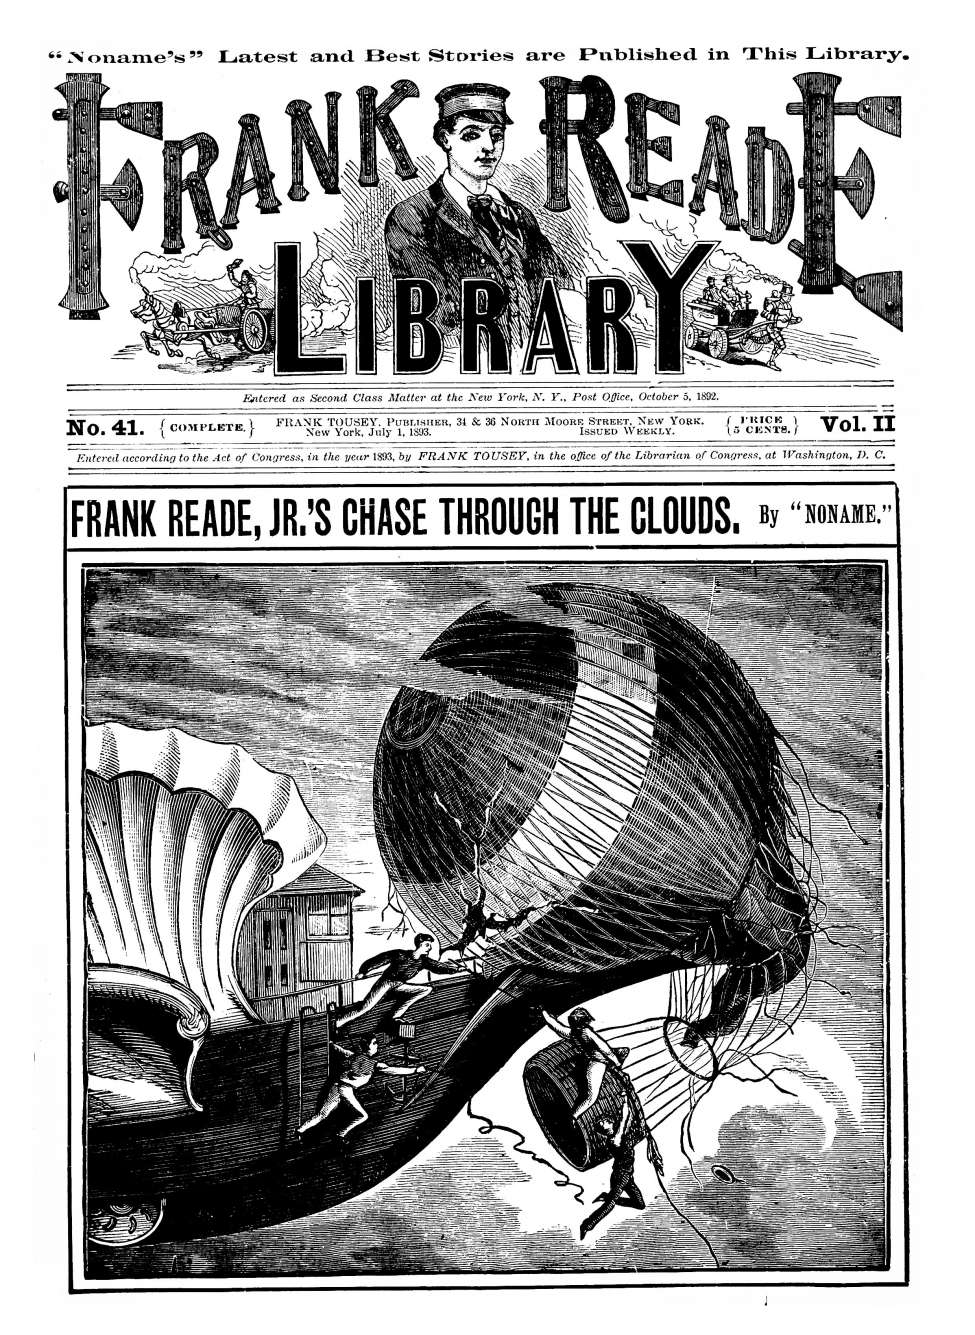 Book Cover For v02 41 - Frank Reade, Jr.s, Chase Through the Clouds